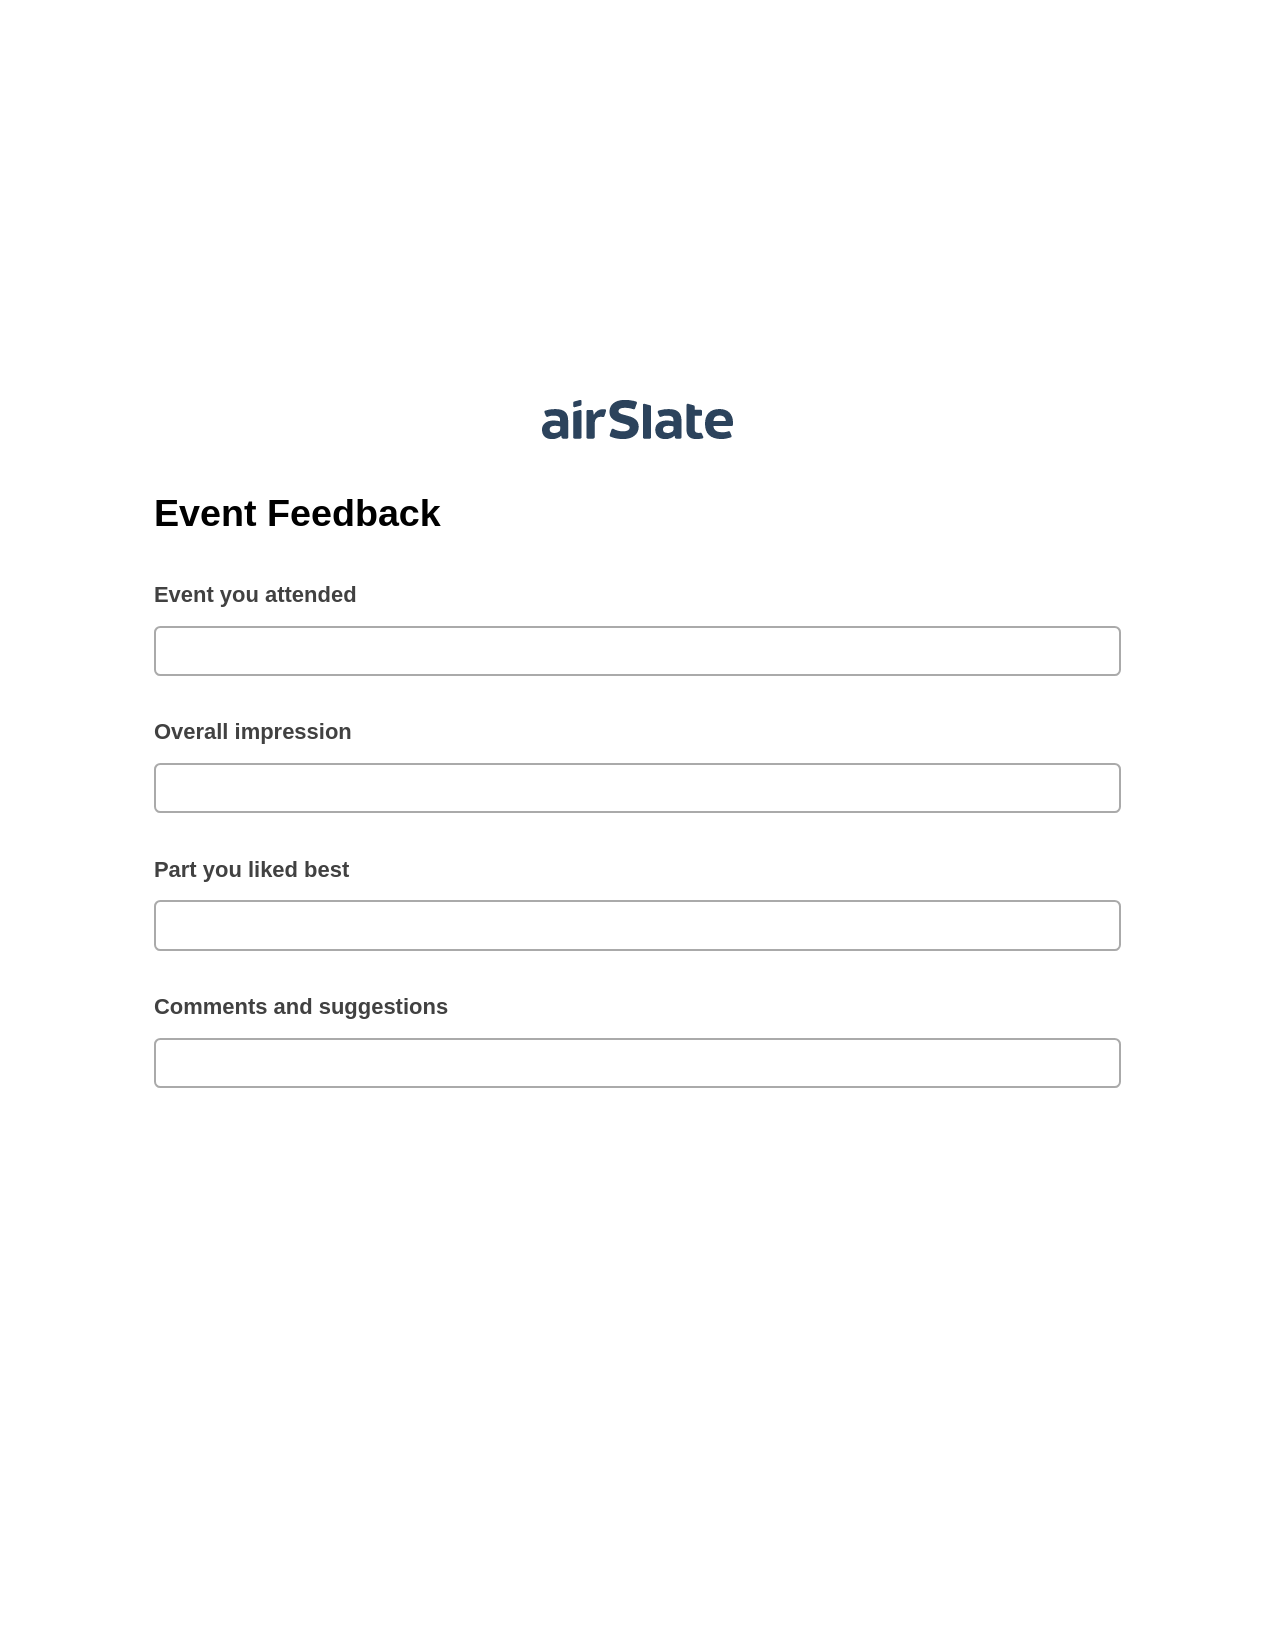 Event Feedback Pre-fill Dropdowns from MySQL Bot, Reminder Bot, Post-finish Document Bot